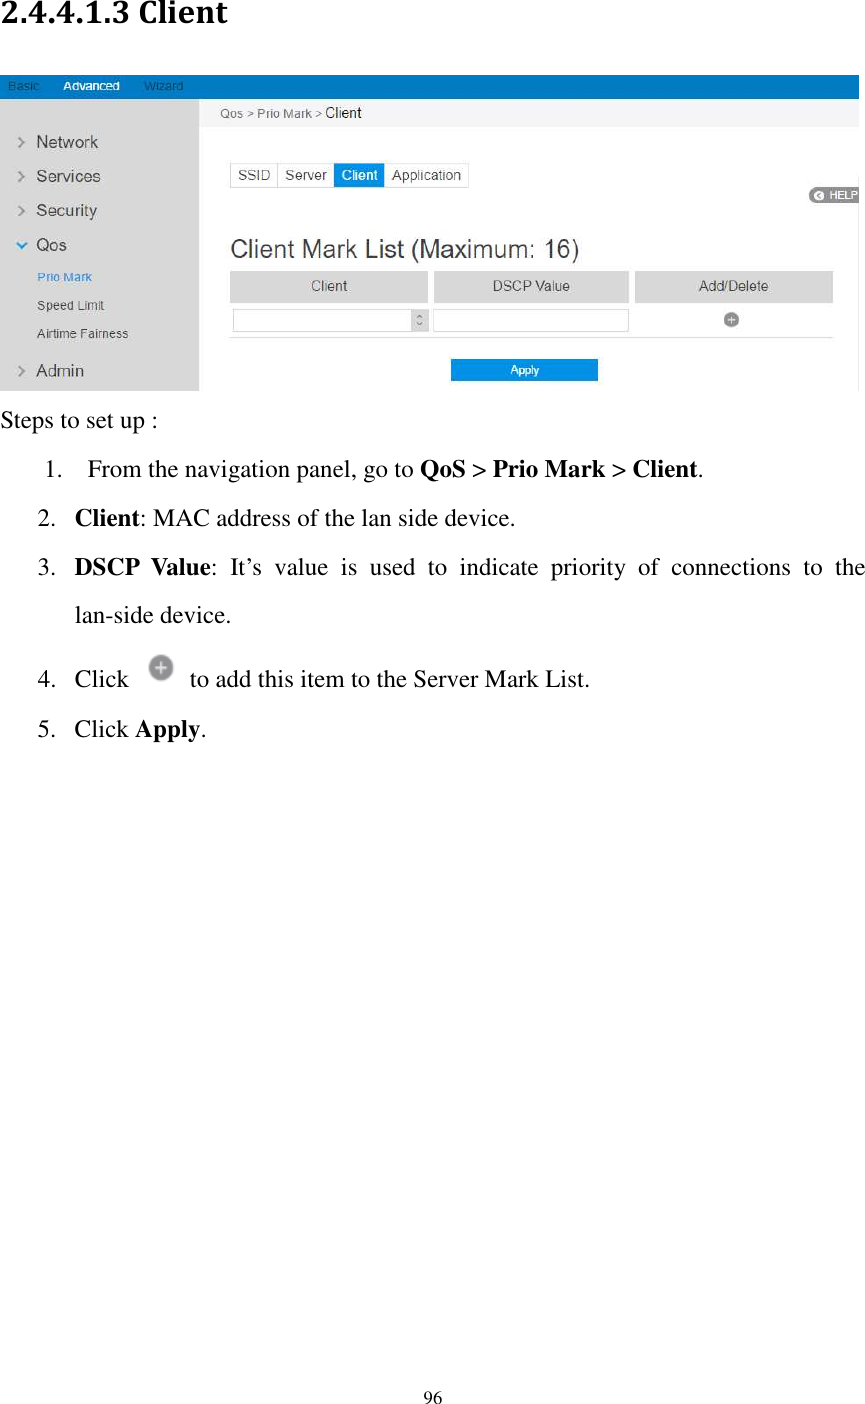  96  2.4.4.1.3 Client  Steps to set up : 1. From the navigation panel, go to QoS &gt; Prio Mark &gt; Client.   2. Client: MAC address of the lan side device.   3. DSCP  Value:  It’s  value  is  used  to  indicate  priority  of  connections  to  the lan-side device.   4. Click    to add this item to the Server Mark List. 5. Click Apply.  